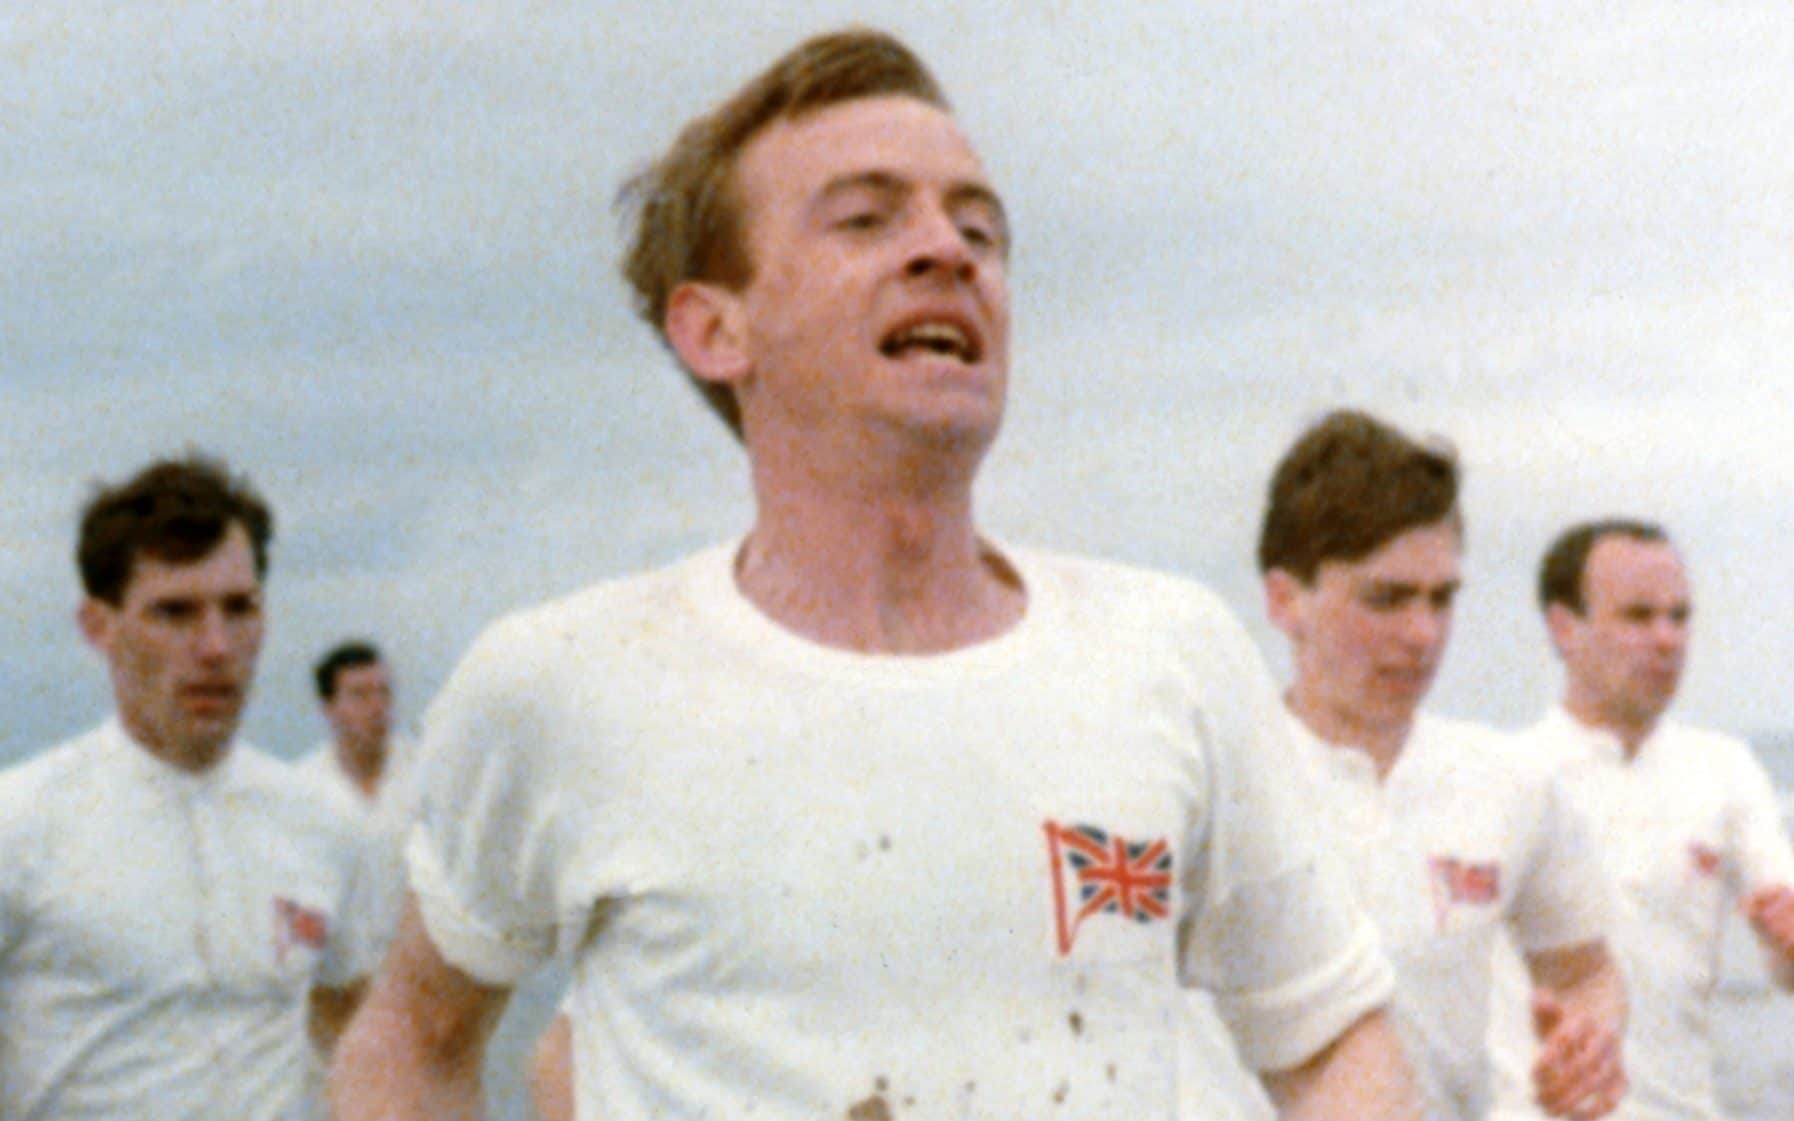 Chariots of Fire’s opening scene music is iconic, but it nearly did not make the film